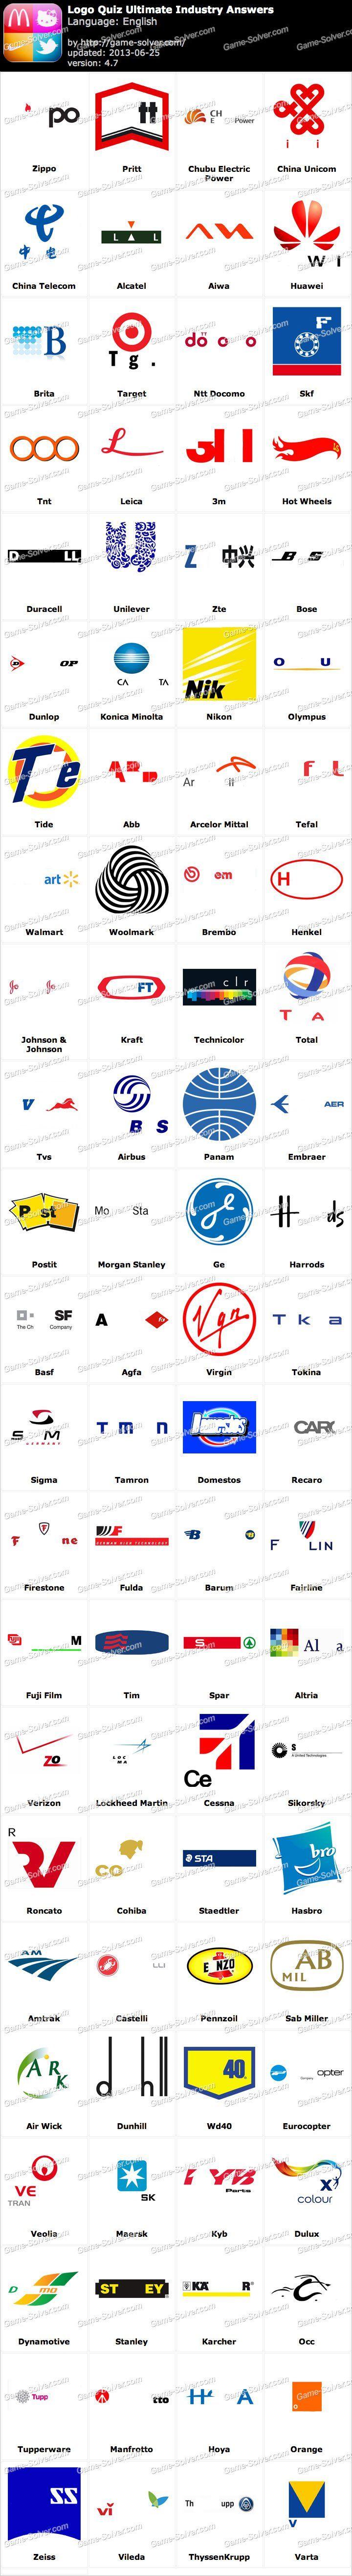 Tobacco Industry Logo - Logo Quiz Ultimate Industry Answers. Projects to Try. Logos, Logo